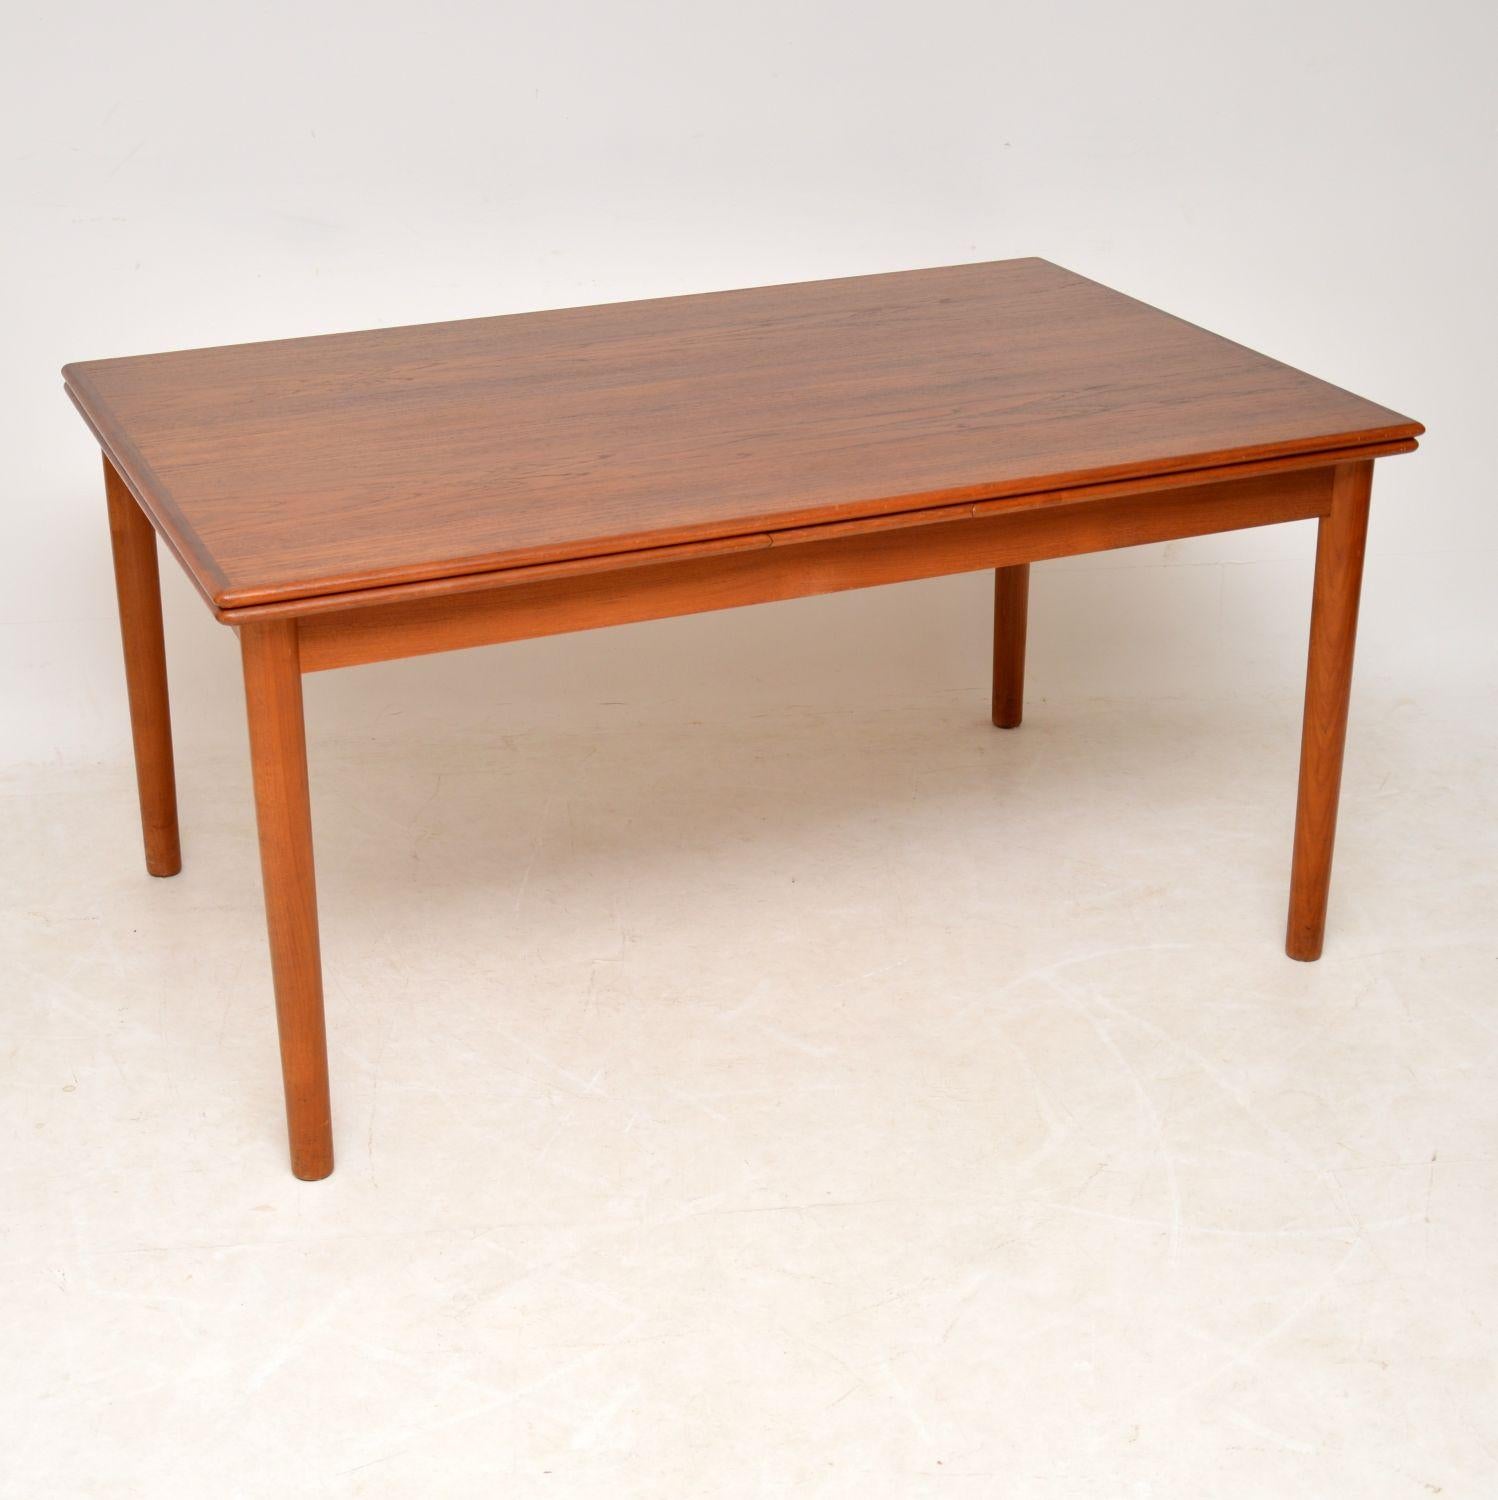 A beautiful and top quality vintage Danish extending dining table in teak, dating from the 1960s-1970s. This is really well made, it has two drawer leaves that can be pulled out to extend this to a ten-seat. It is also possible to pull out /